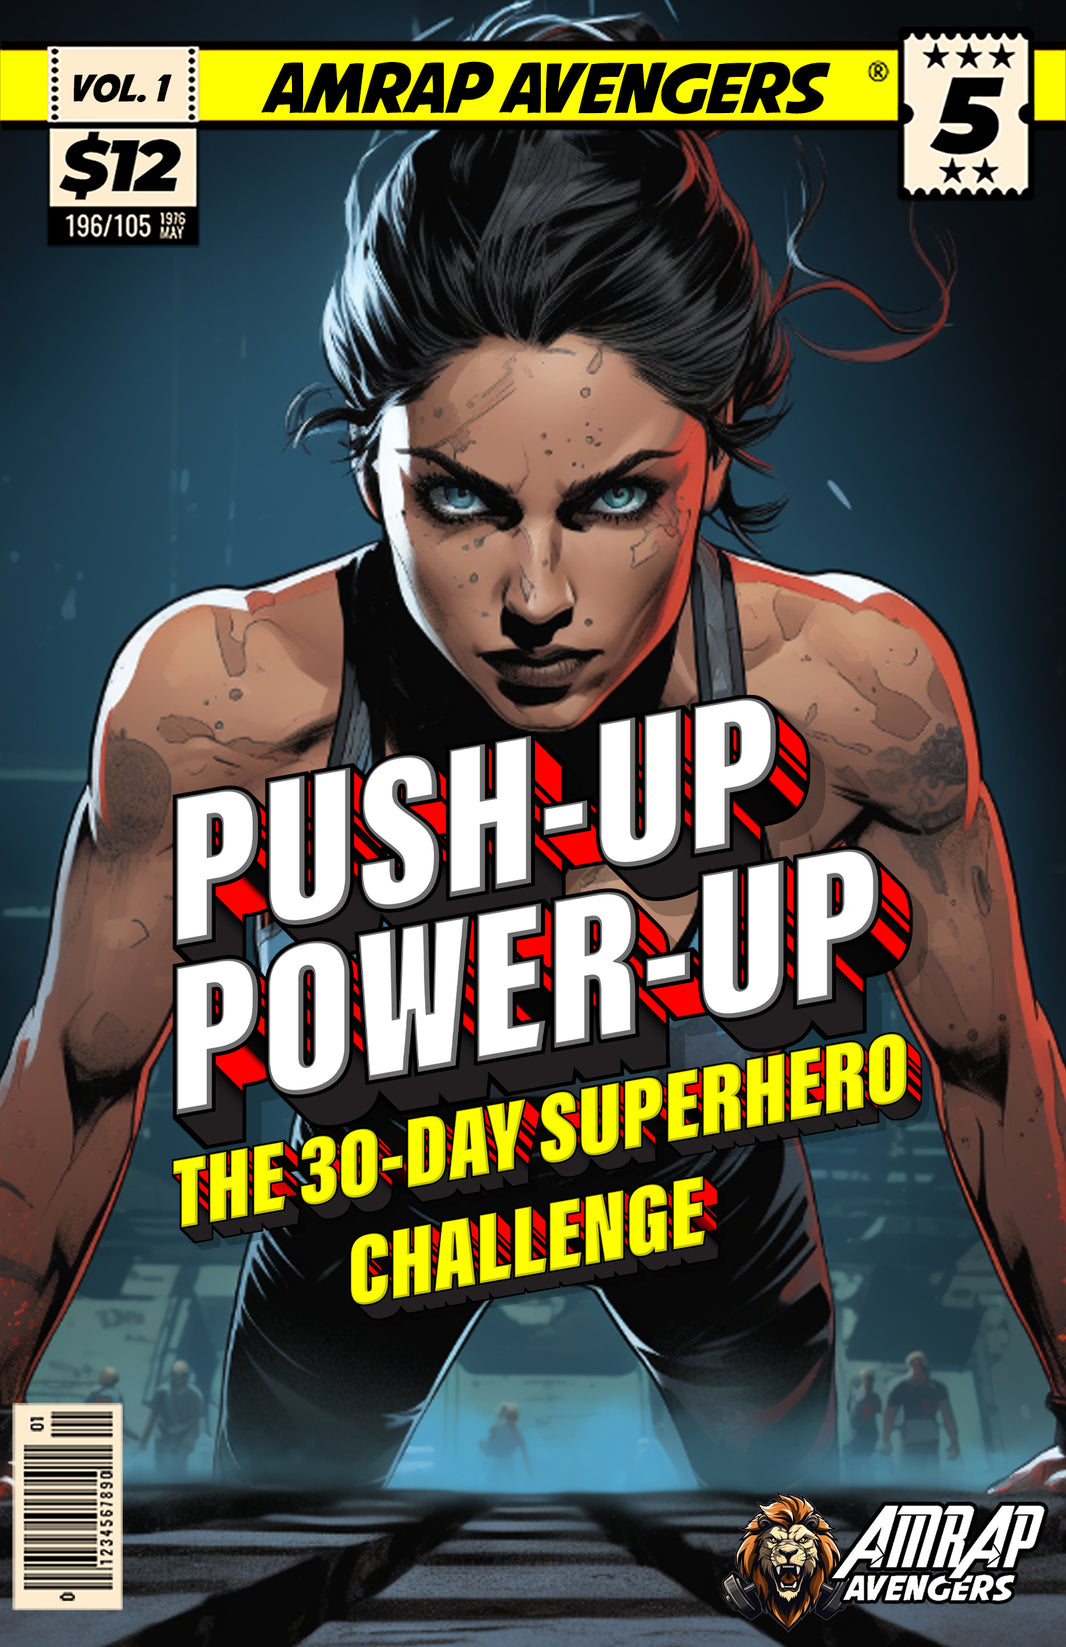 Push-Up Power-Up: The 30 Day Superhero Challenge (Paperback)